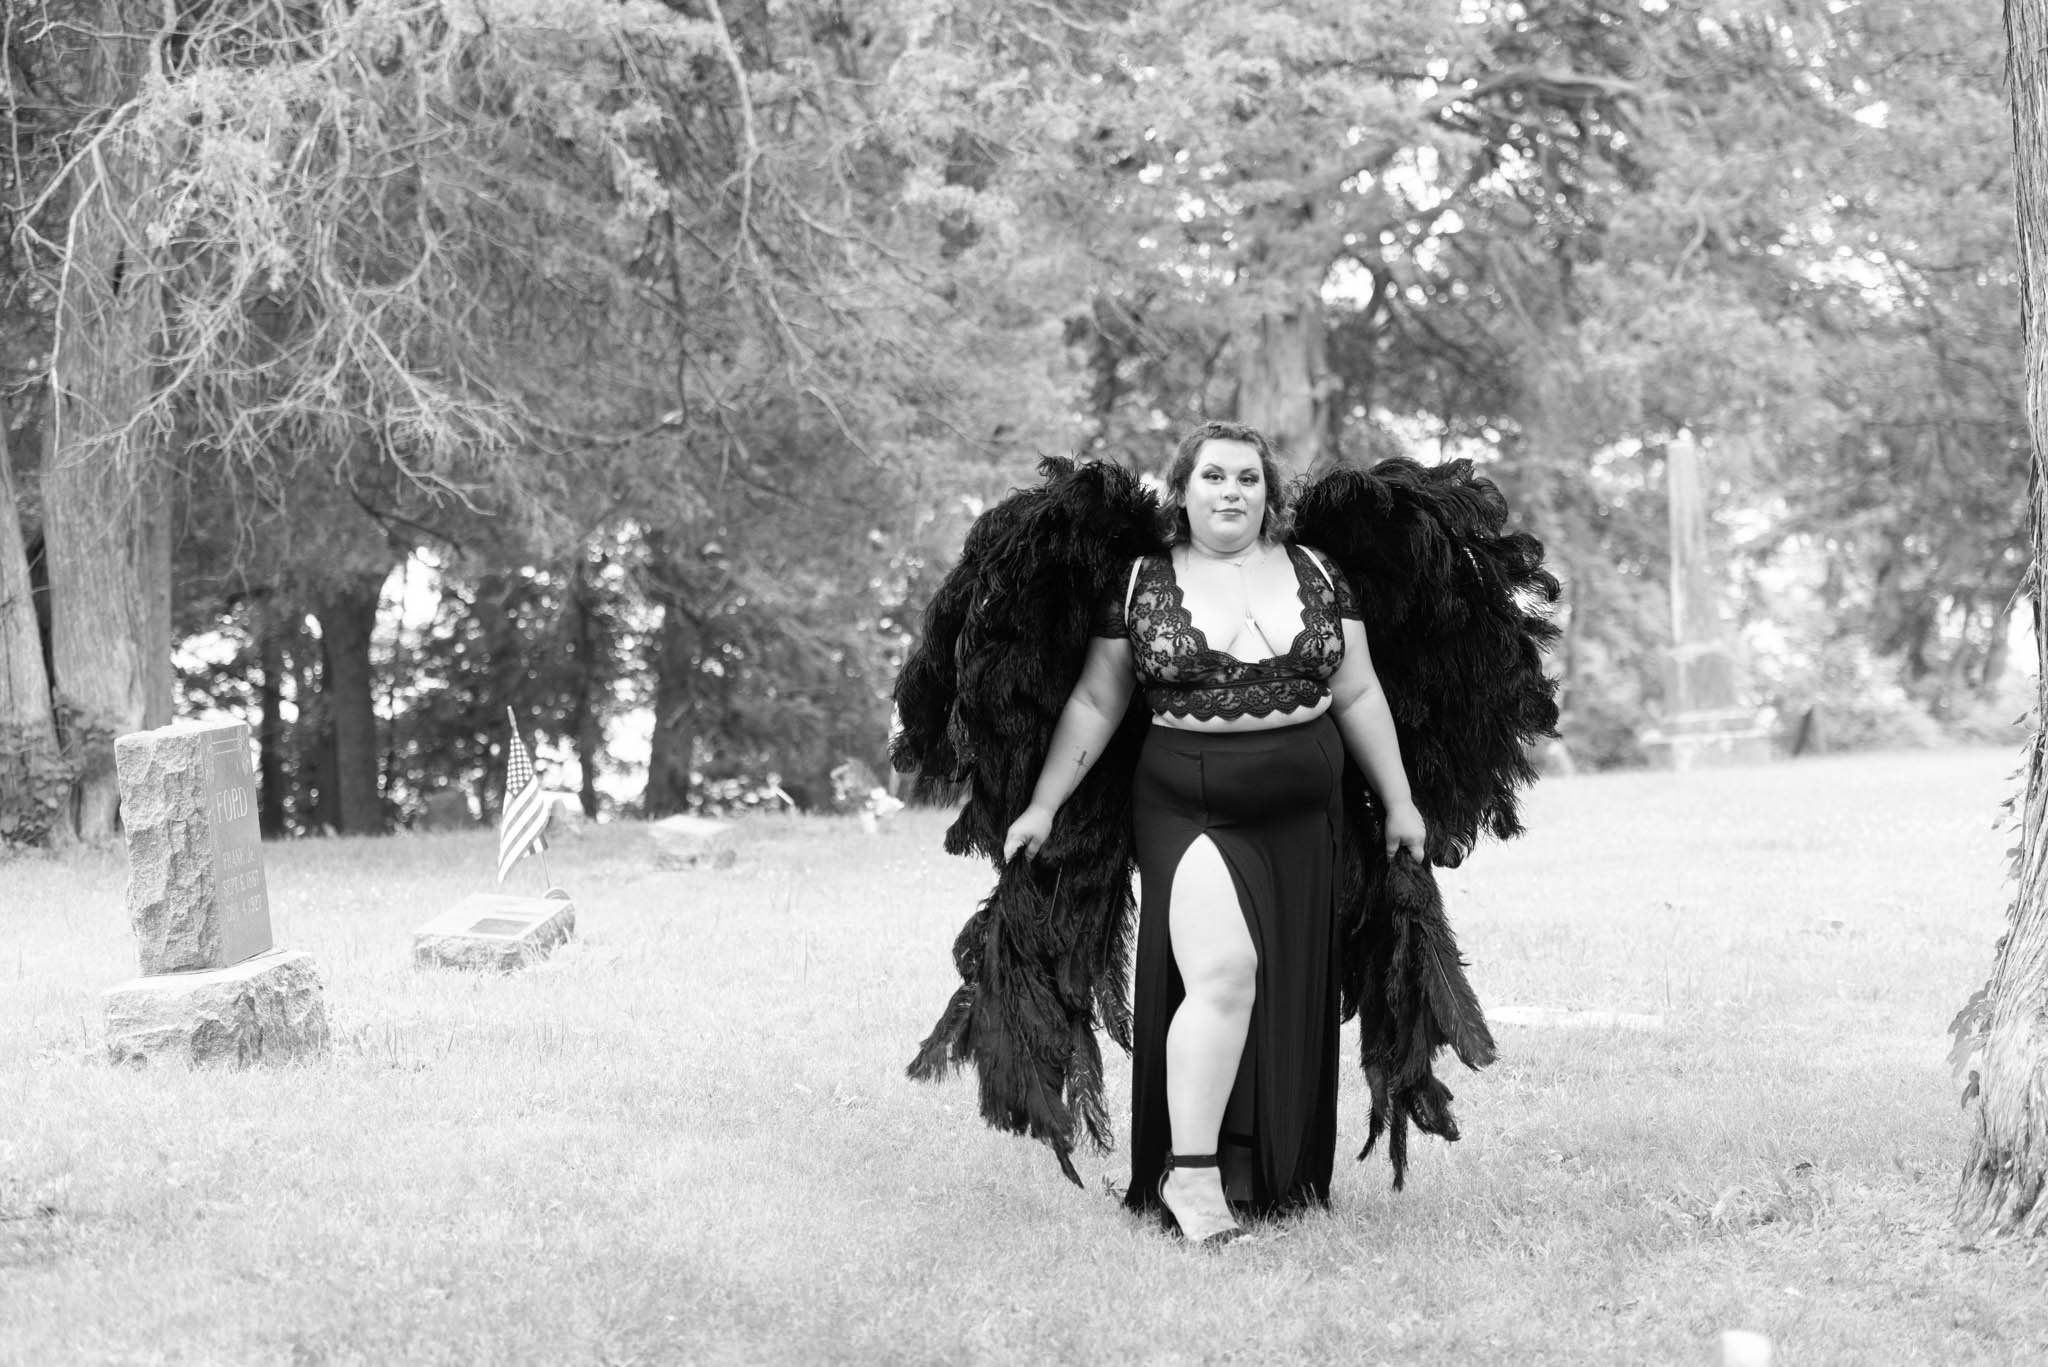  Samantha in black dress and black angel wings poses in cemetery. In black and white. 